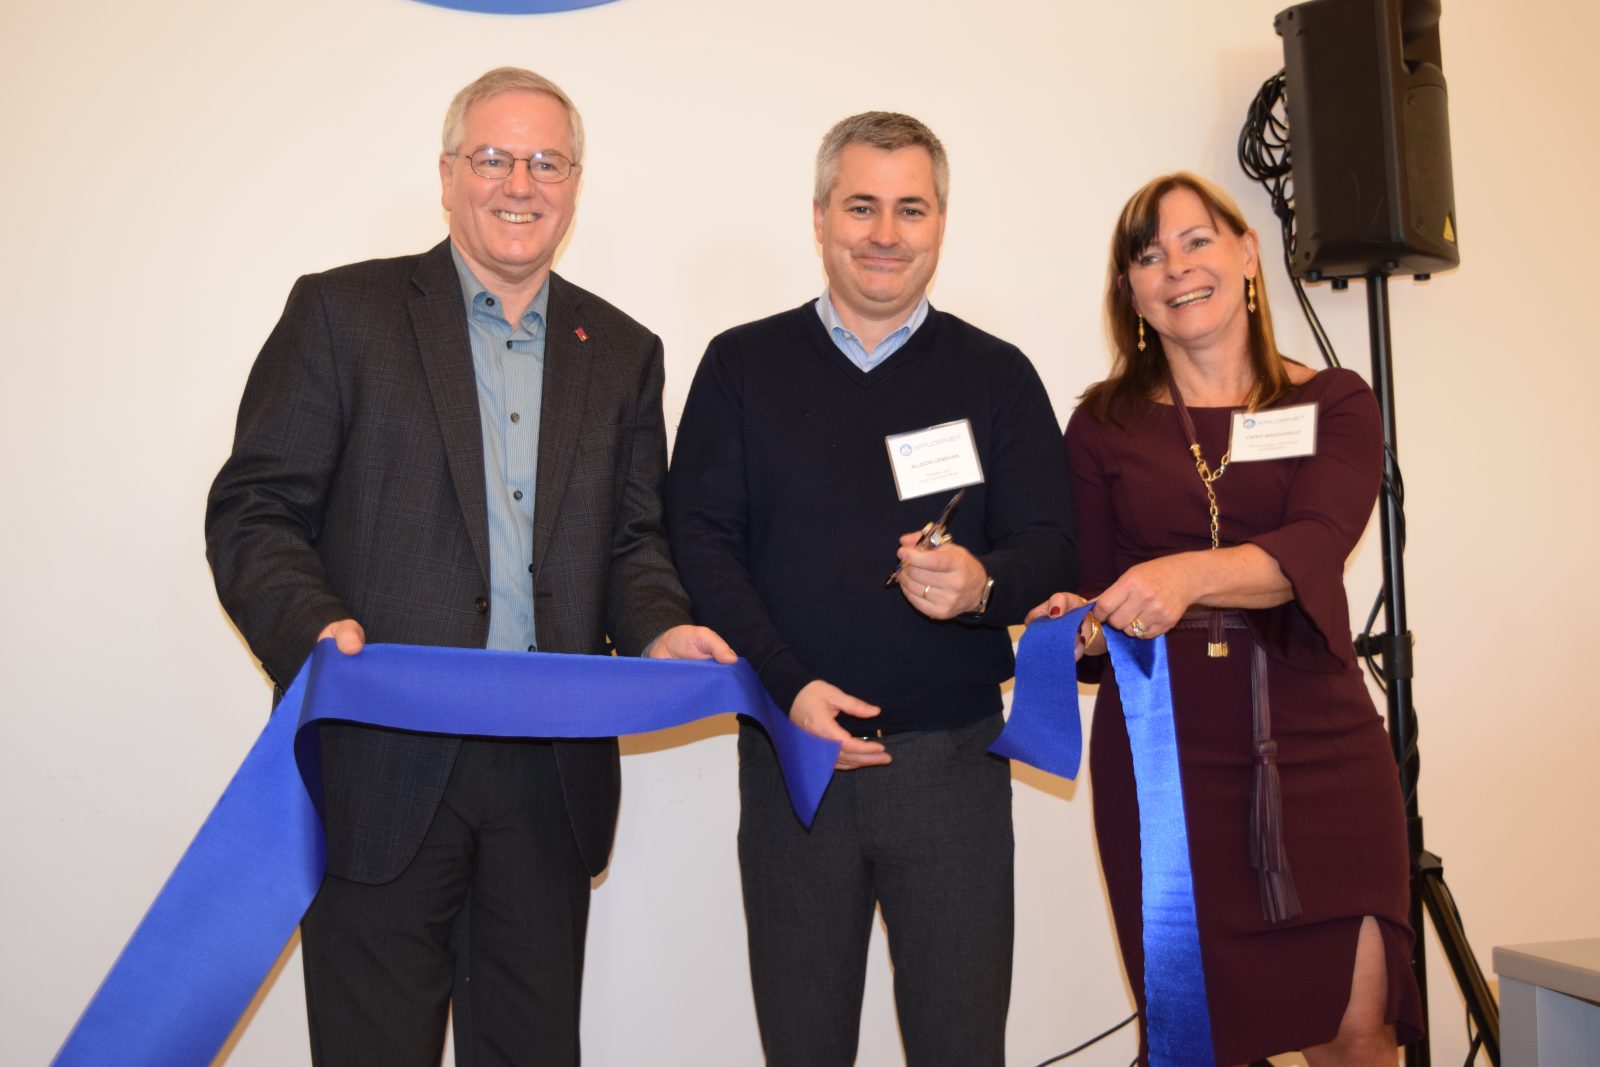 Xplornet officially opens new offices in Cornwall